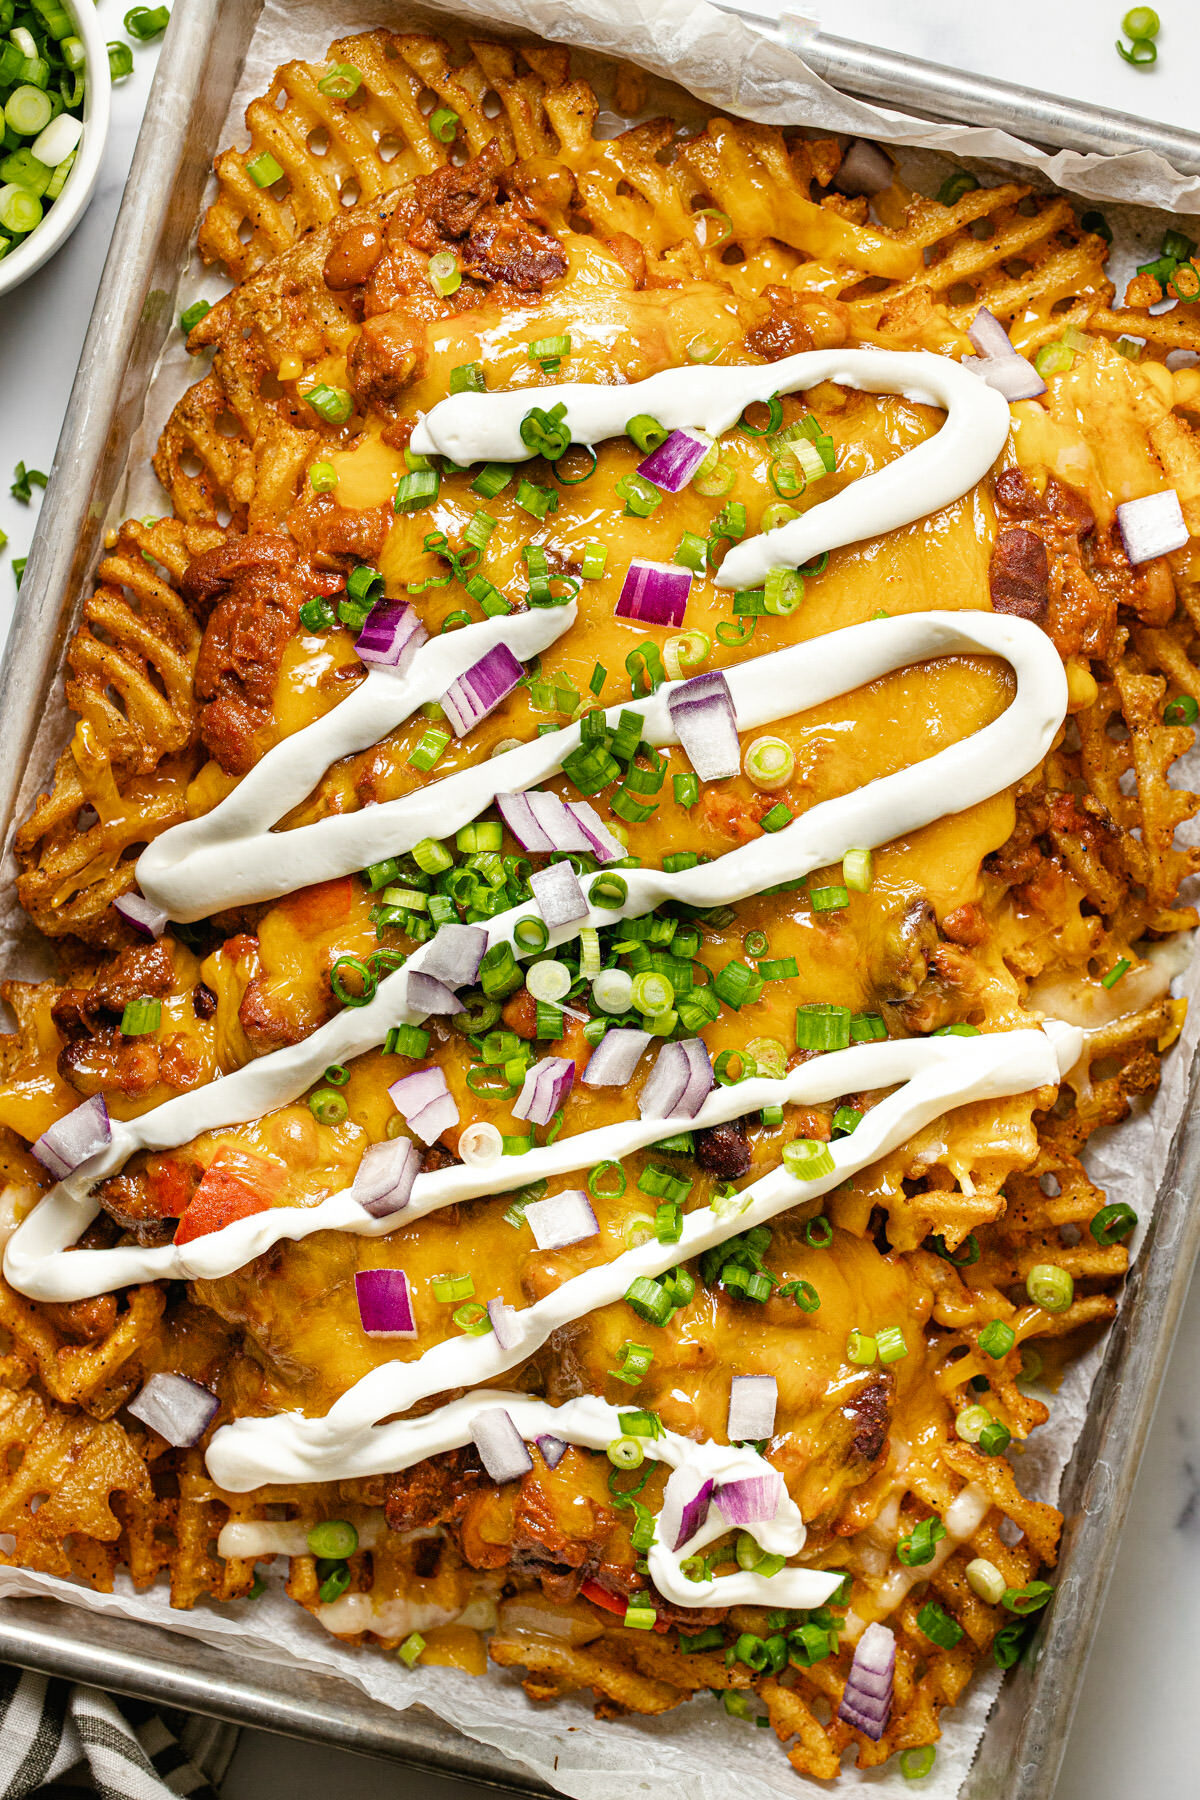 Chili cheese fries on a baking sheet drizzled with sour cream and garnished with green onion